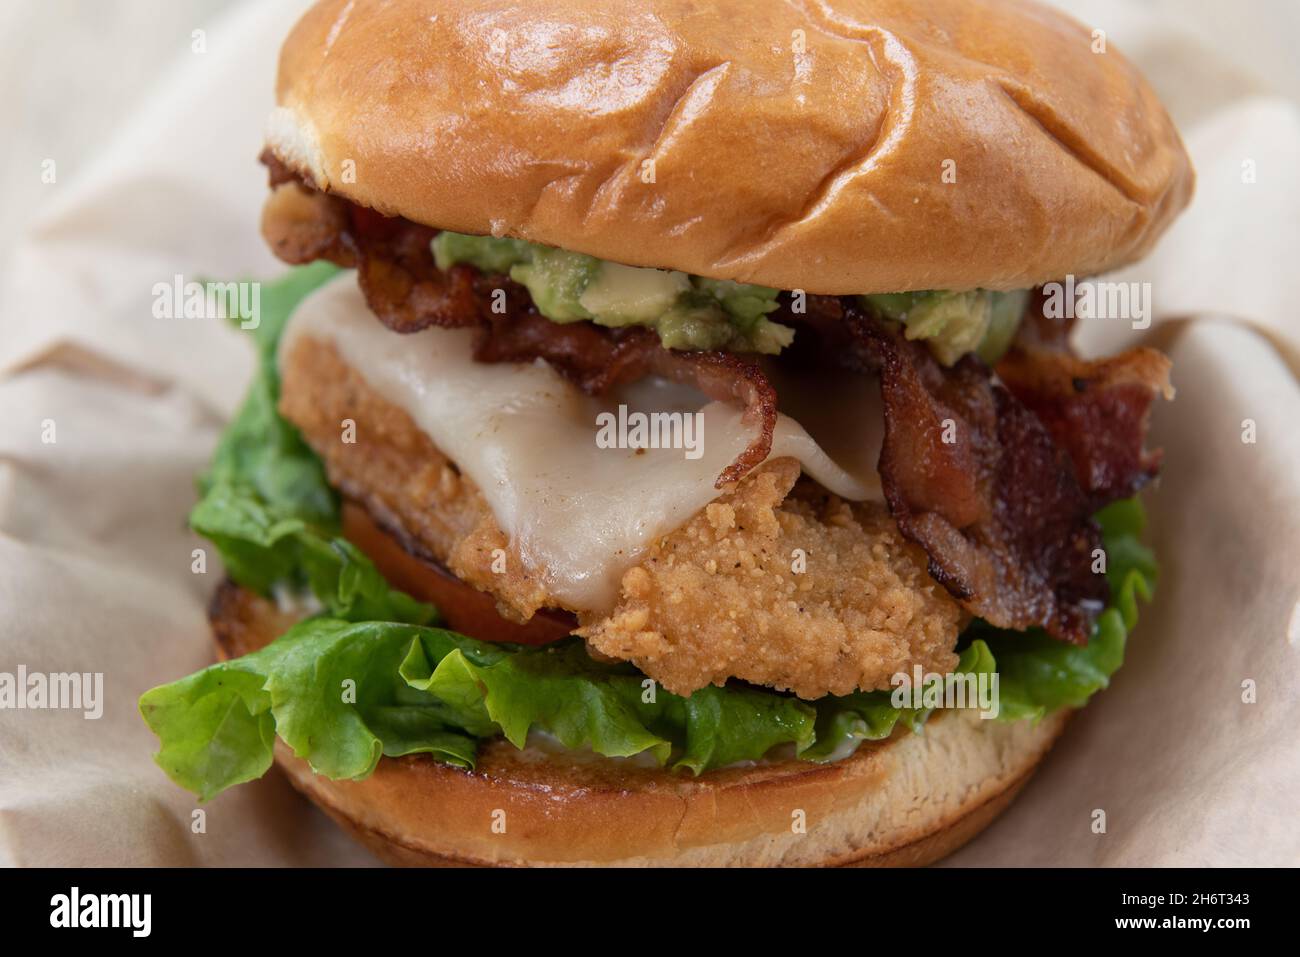 Close up texture of a fried chicken club sandwich with melted cheese, bacon, lettuce, and tomato on a toasted bun. Stock Photo